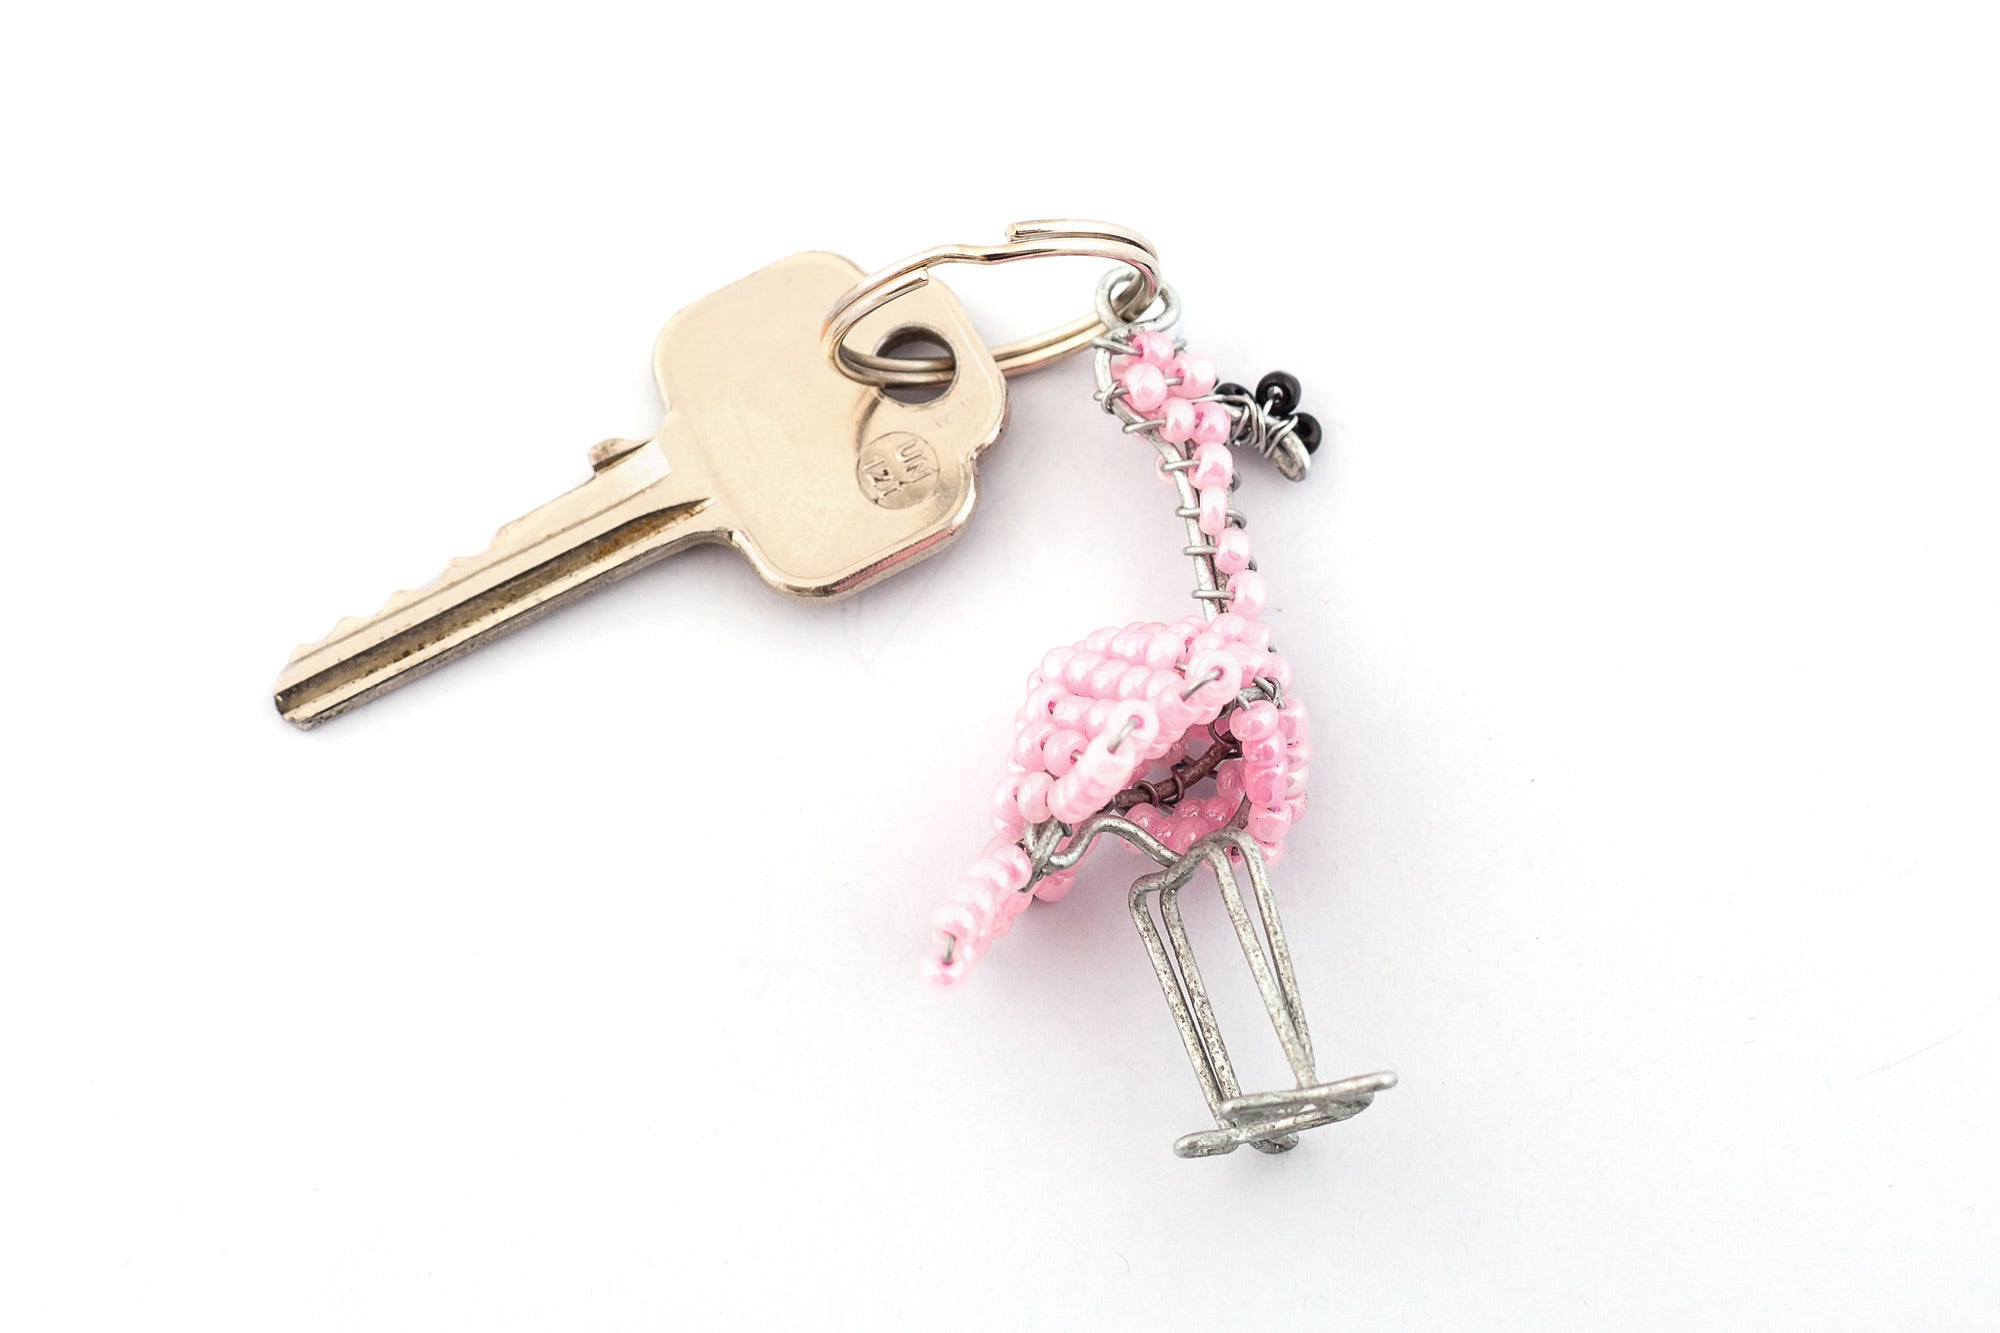 Beaded Pink Flamingo key chain.  Handmade with a beaded pink body and a black beak!  Fair trade products.